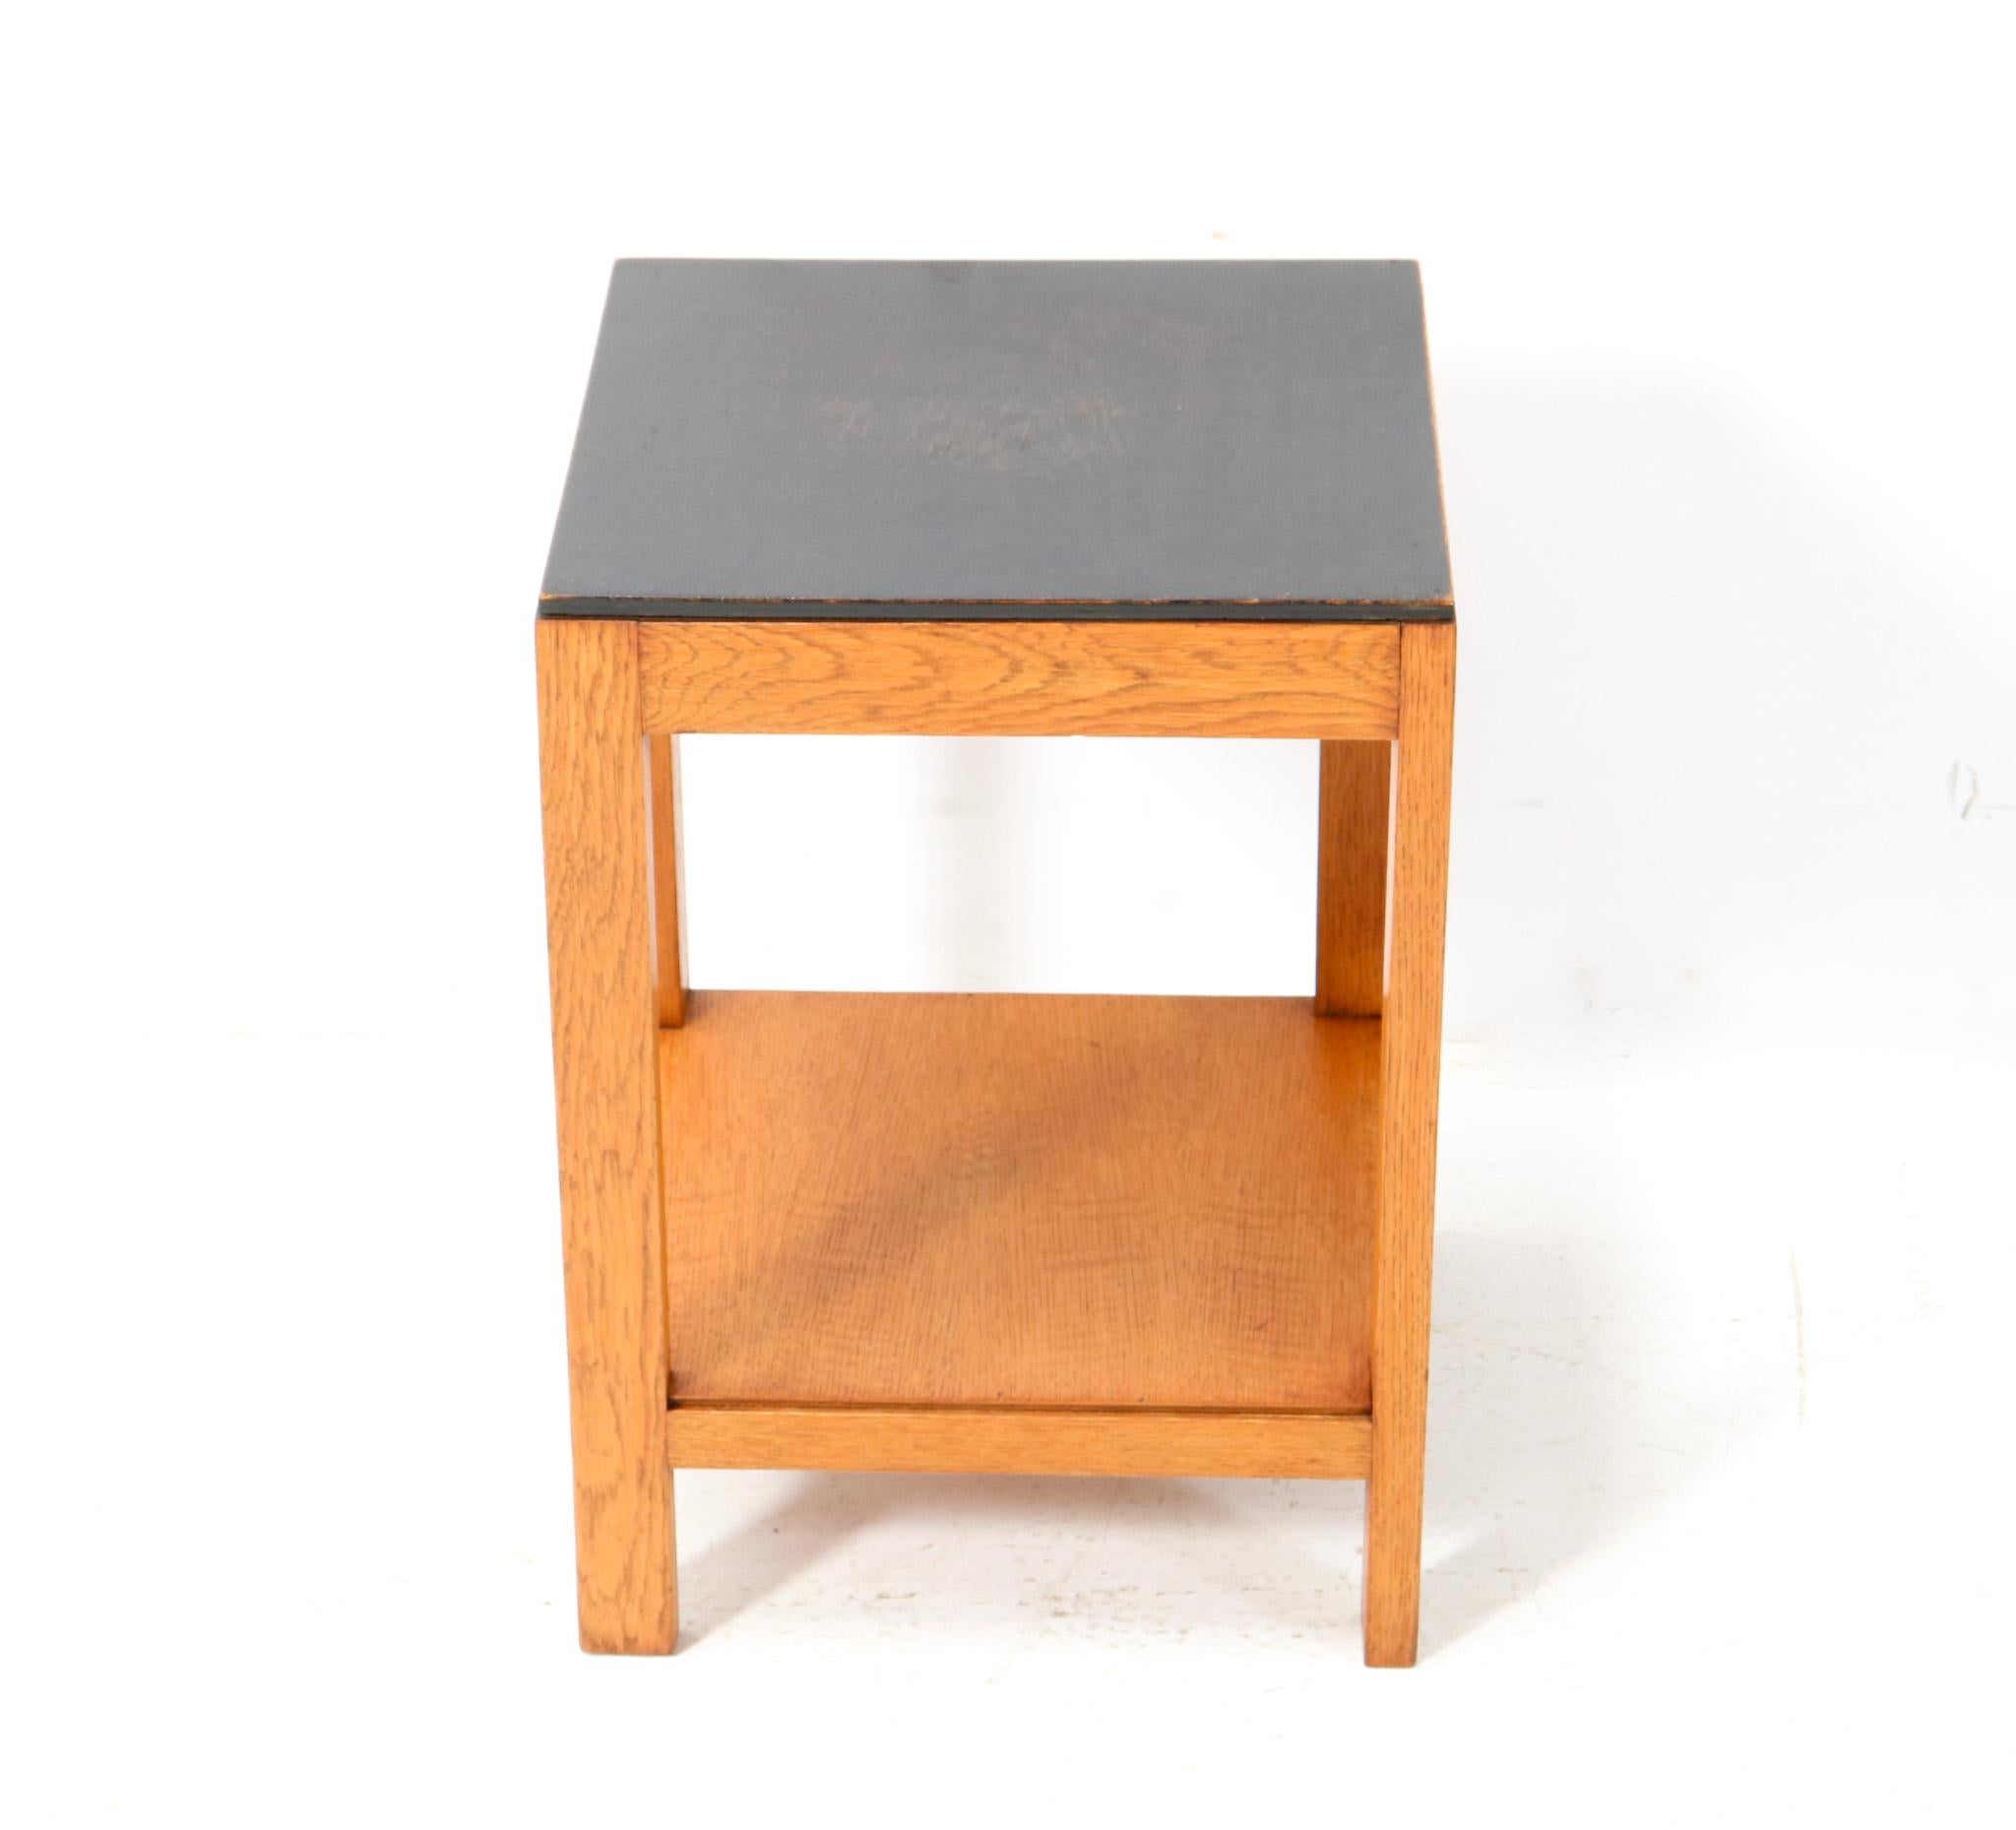 Stunning and rare Art Deco Modernist side table.
The design is in the style of L.O.V. Oosterbeek.
Striking Dutch design from the 1920s.
Solid oak with original black lacquered top.
In very good original condition with minor wear consistent with age